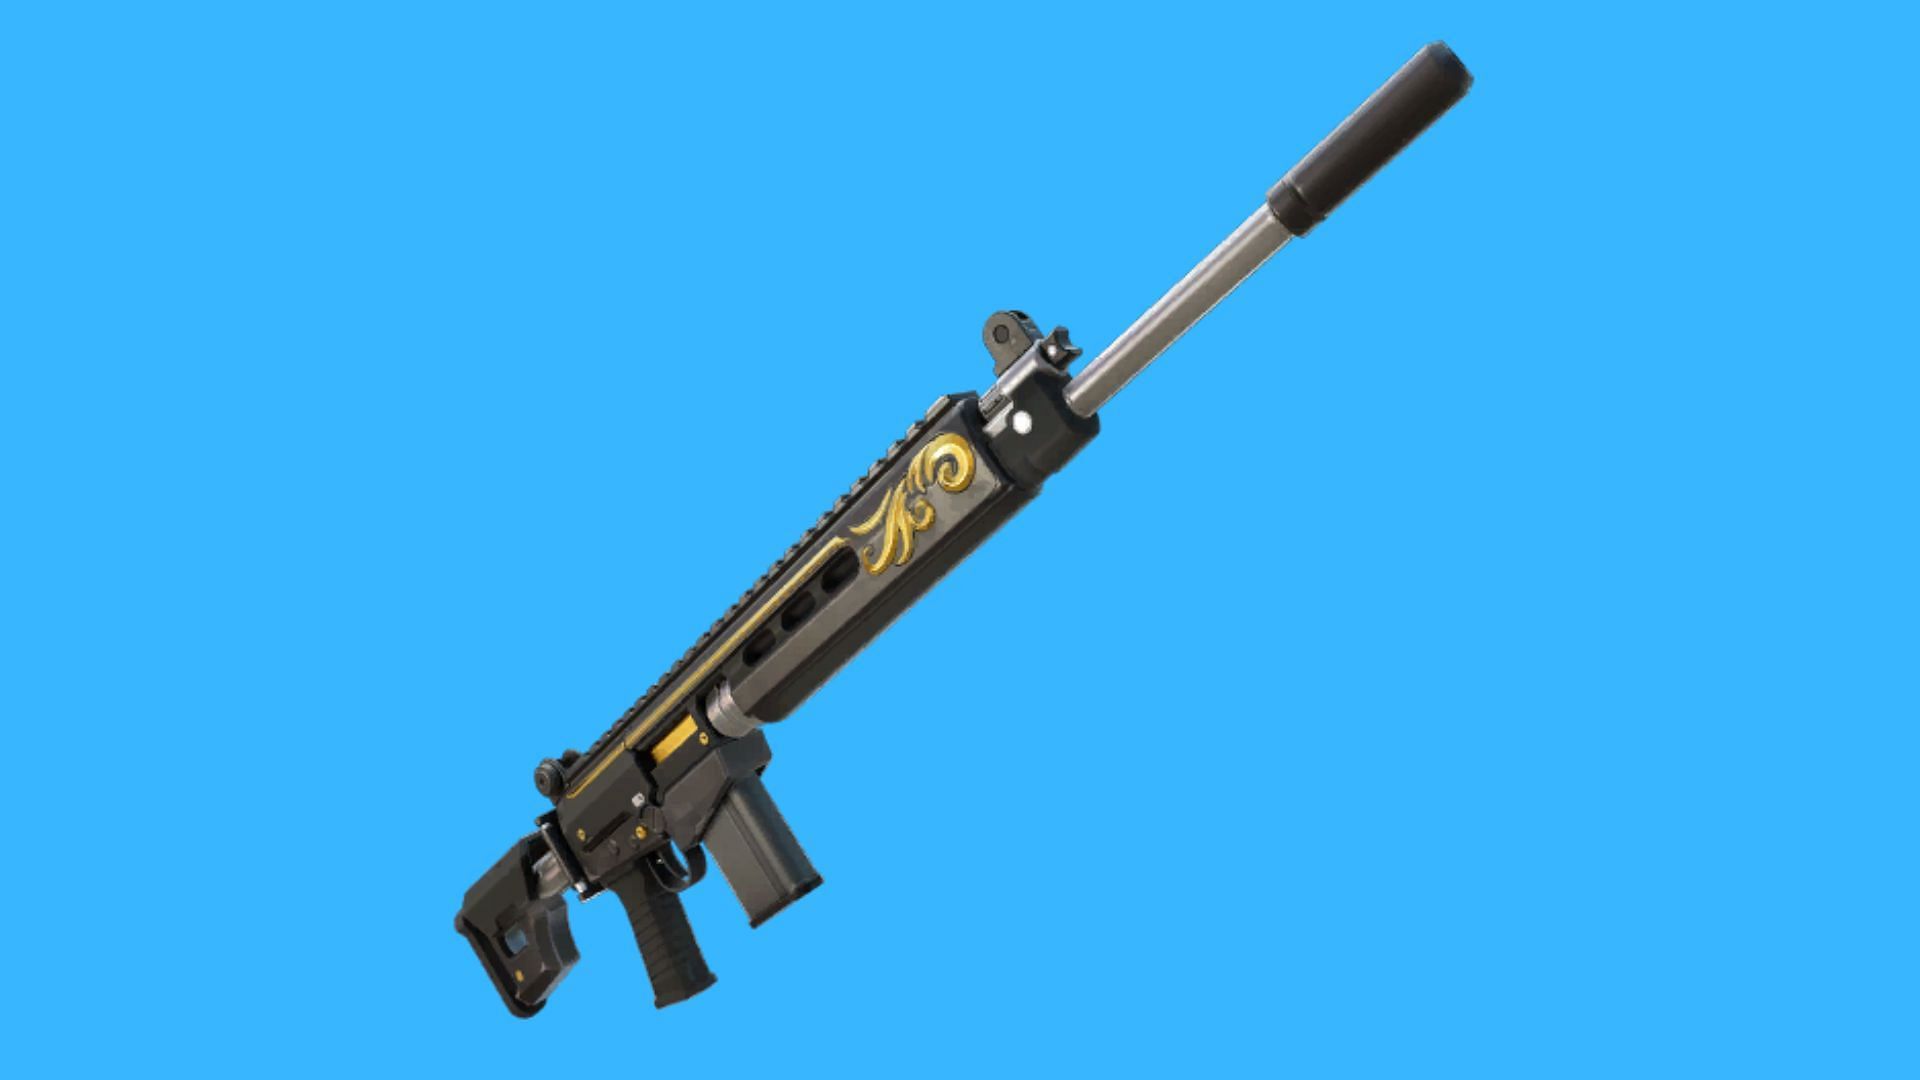 Where to find Enforcer AR in Fortnite